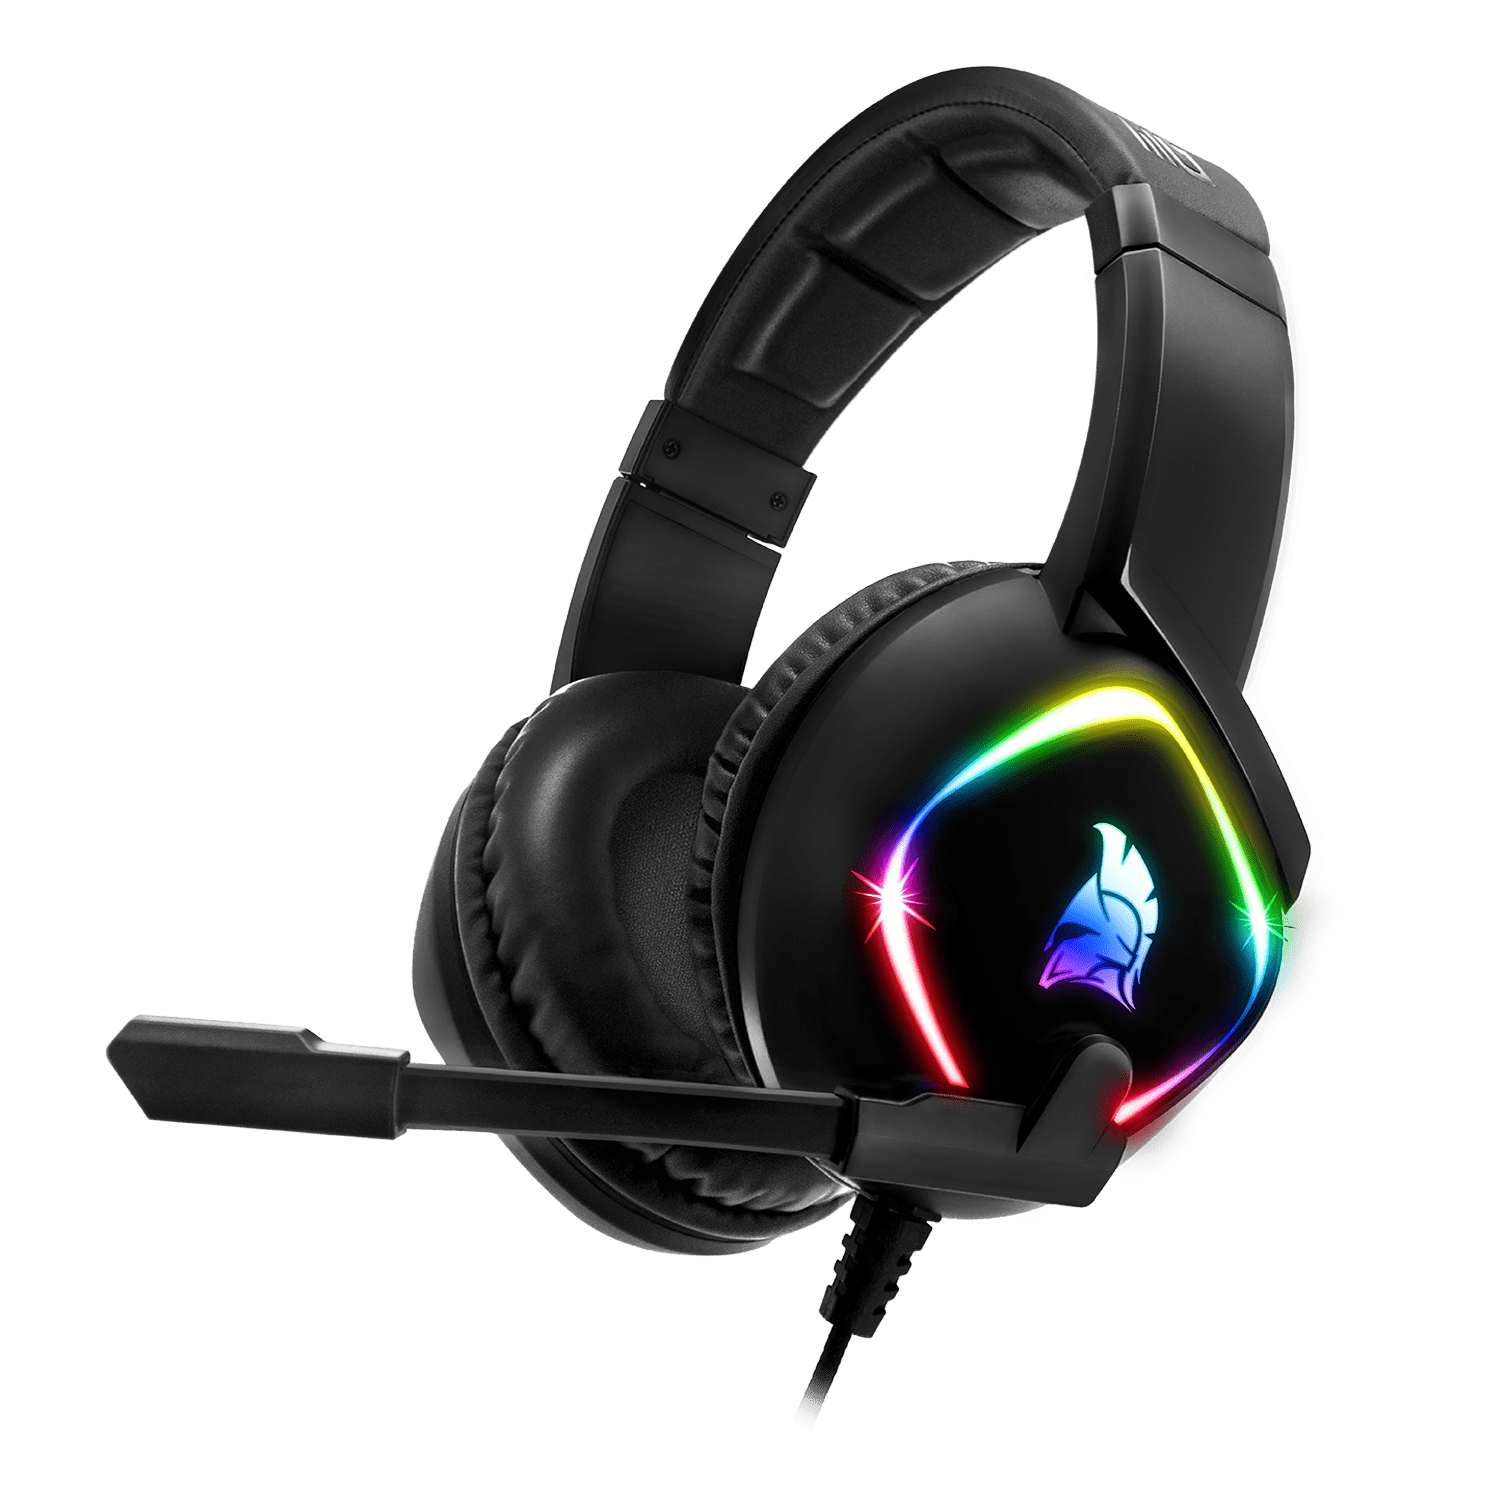 EMPIRE GAMING - WarCry P-W1 Casque Gamer sans Fil WiFi avec